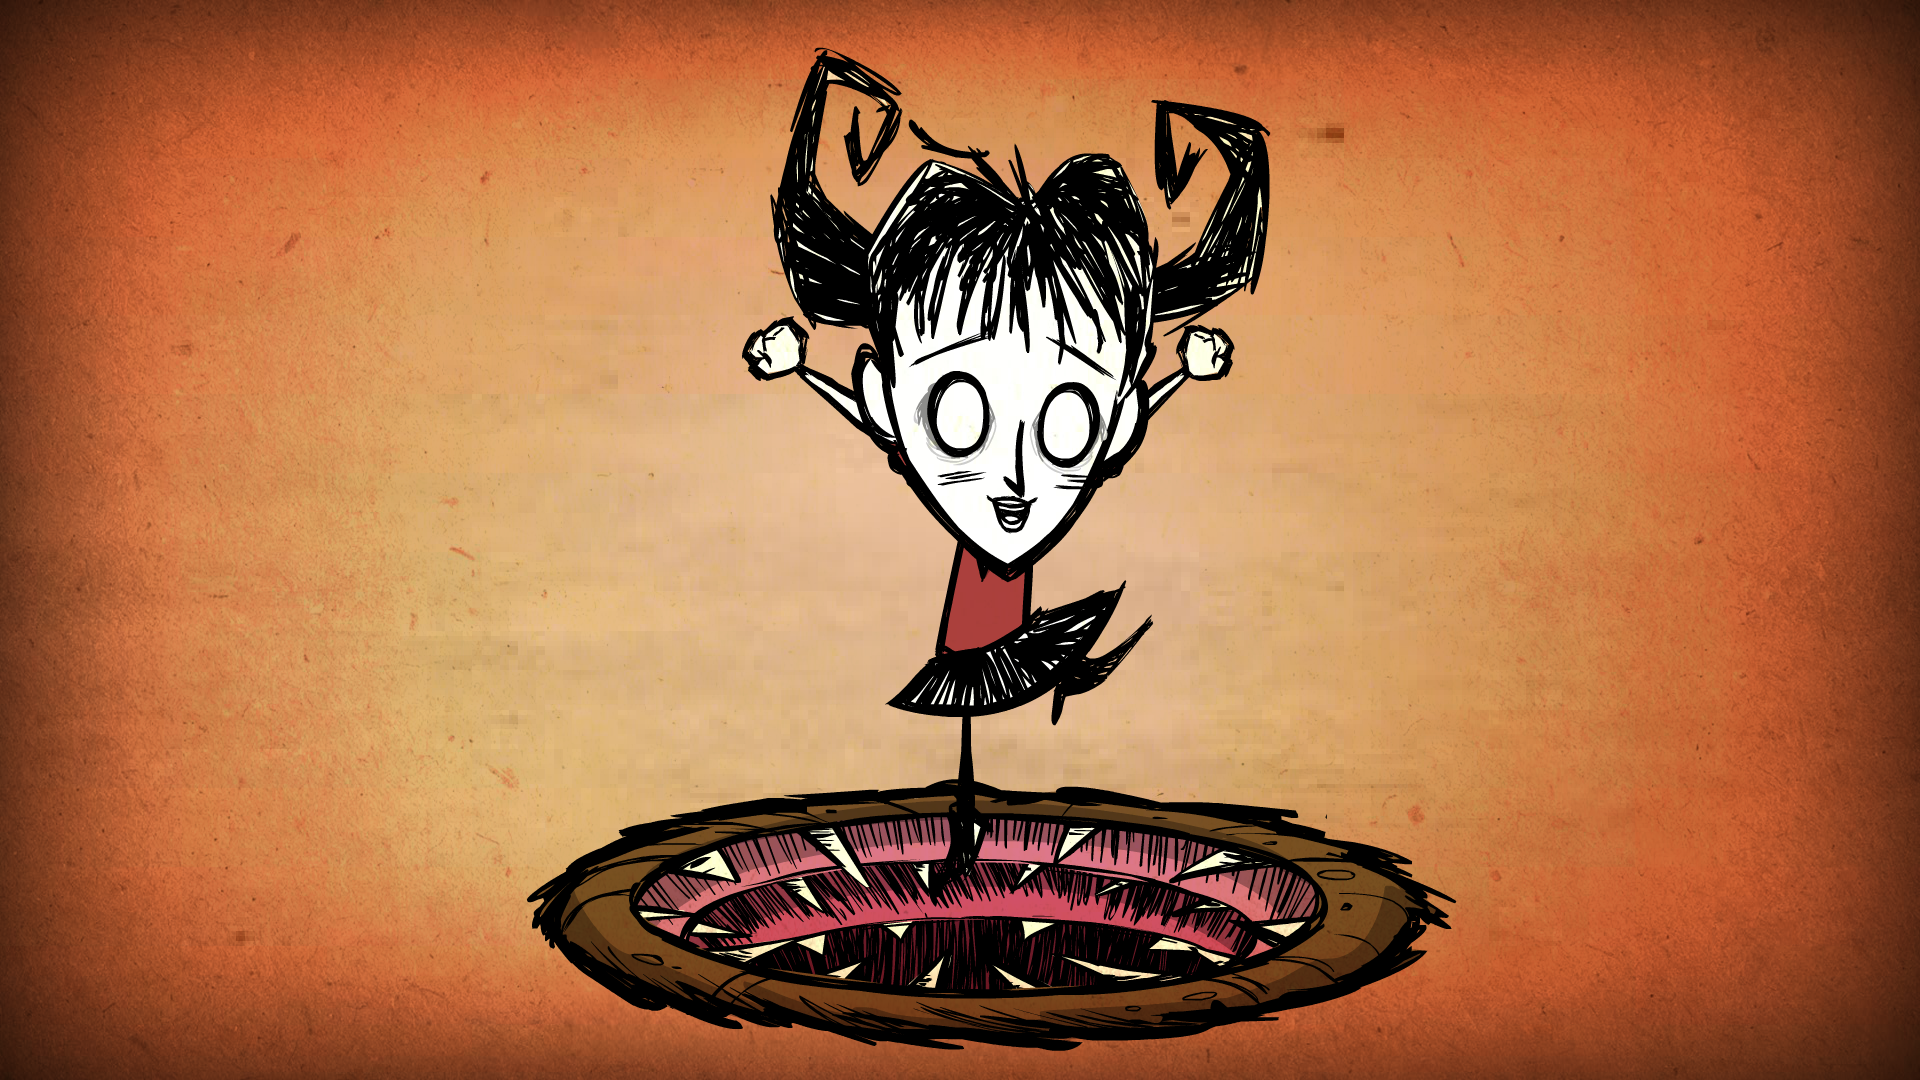 Уиллоу DST. Уиллоу донт старв. Don't Starve together червоточина. Уиллоу don't Starve together.